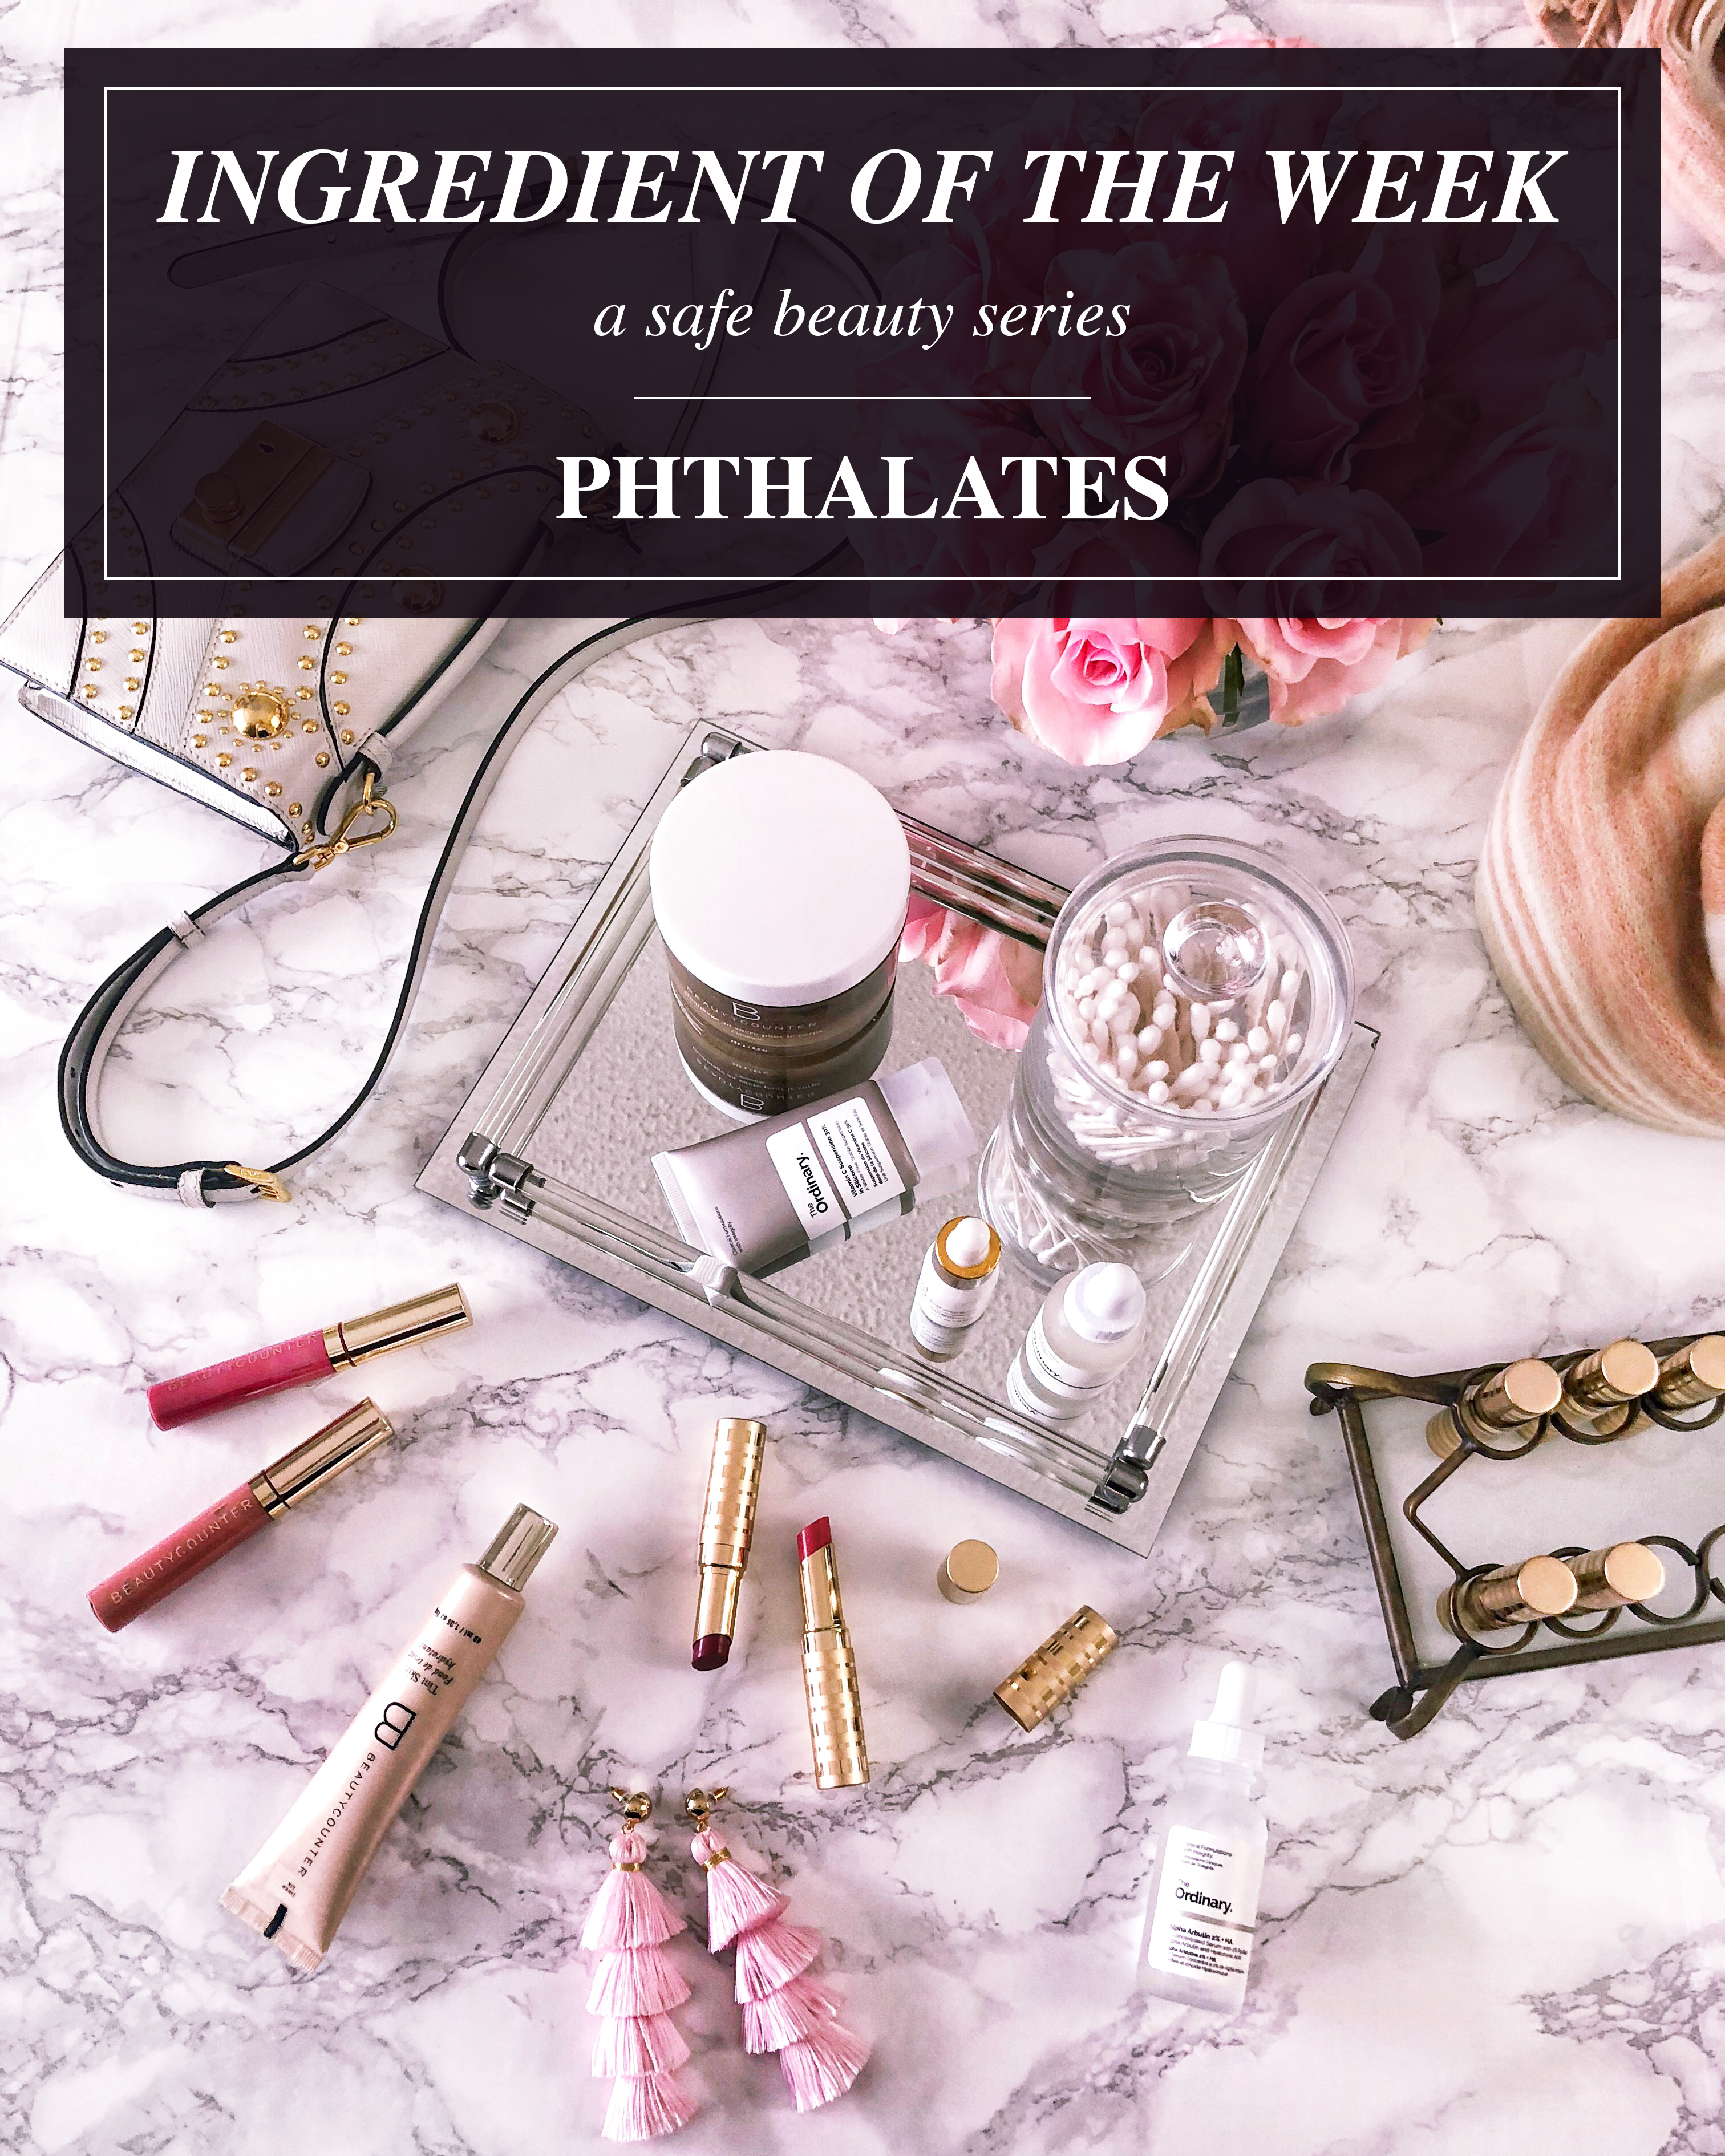 ingredient of the week phthalates - What are Phthalates? by popular Chicago beauty blogger Visions of Vogue